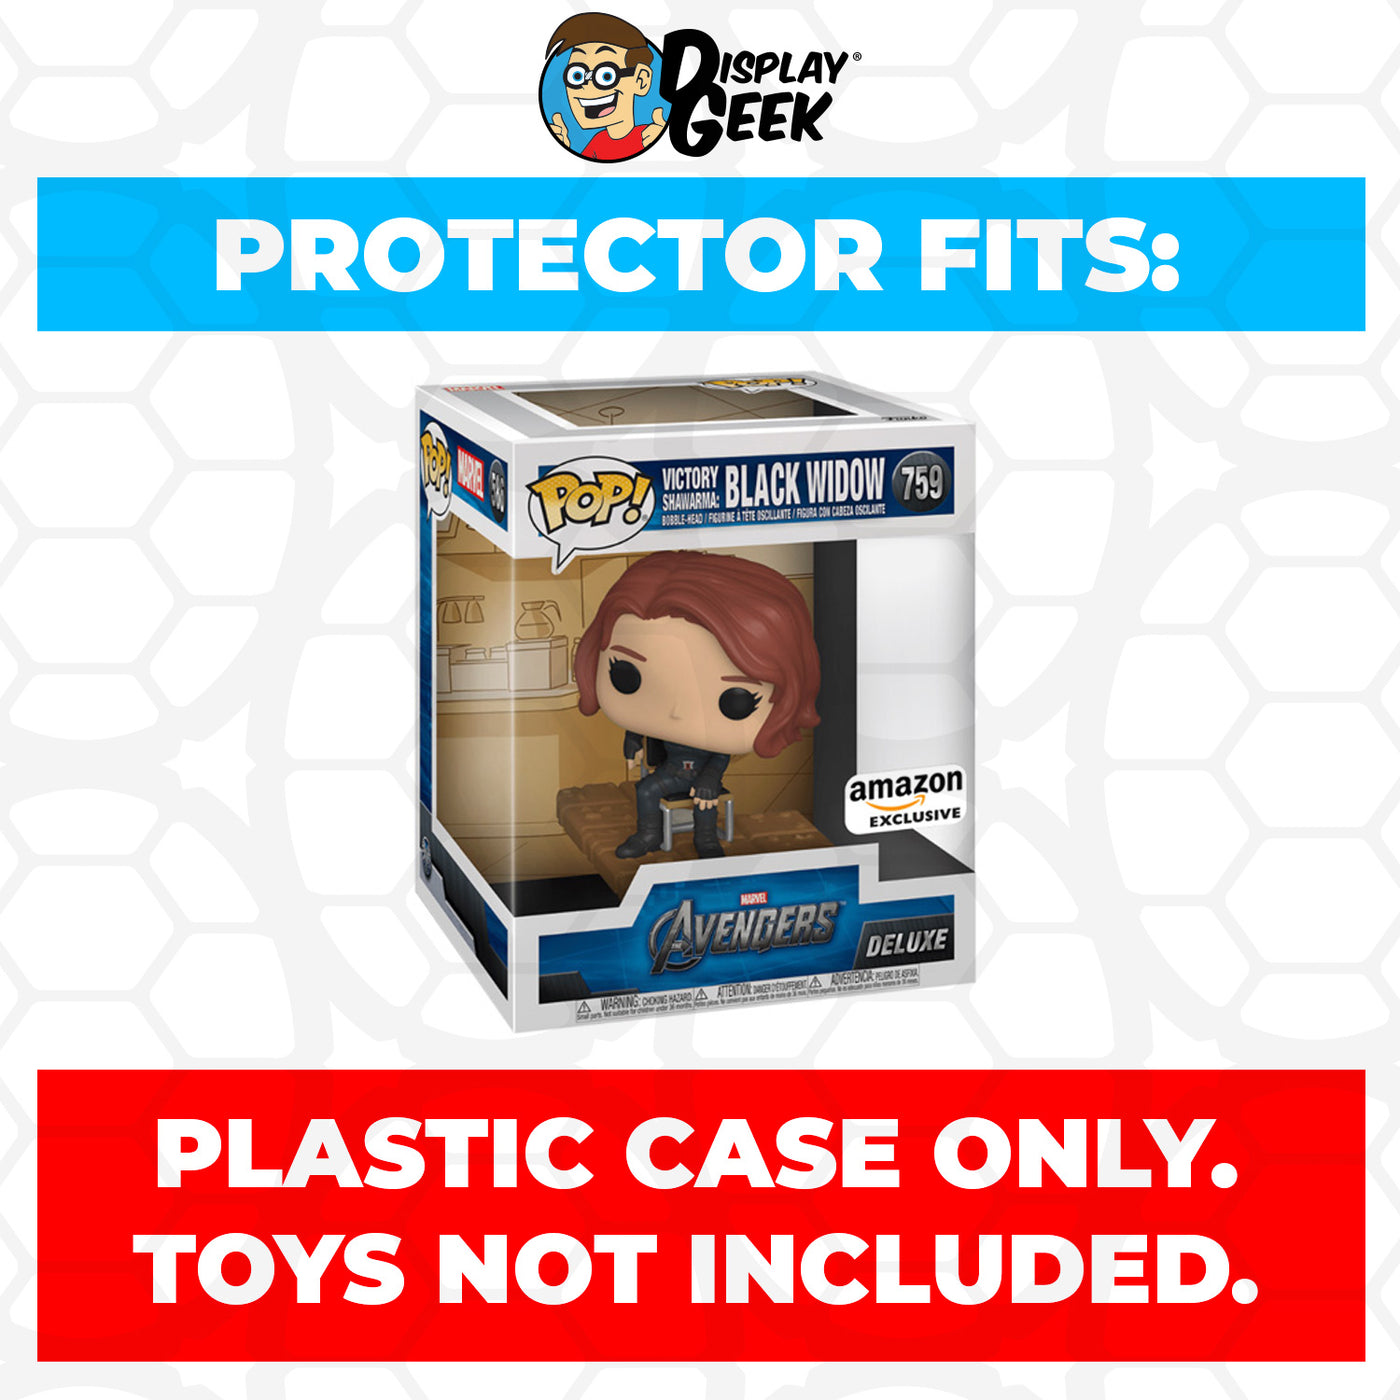 Pop Protector for Victory Shawarma Black Widow #759 Funko Pop Deluxe on The Protector Guide App by Display Geek